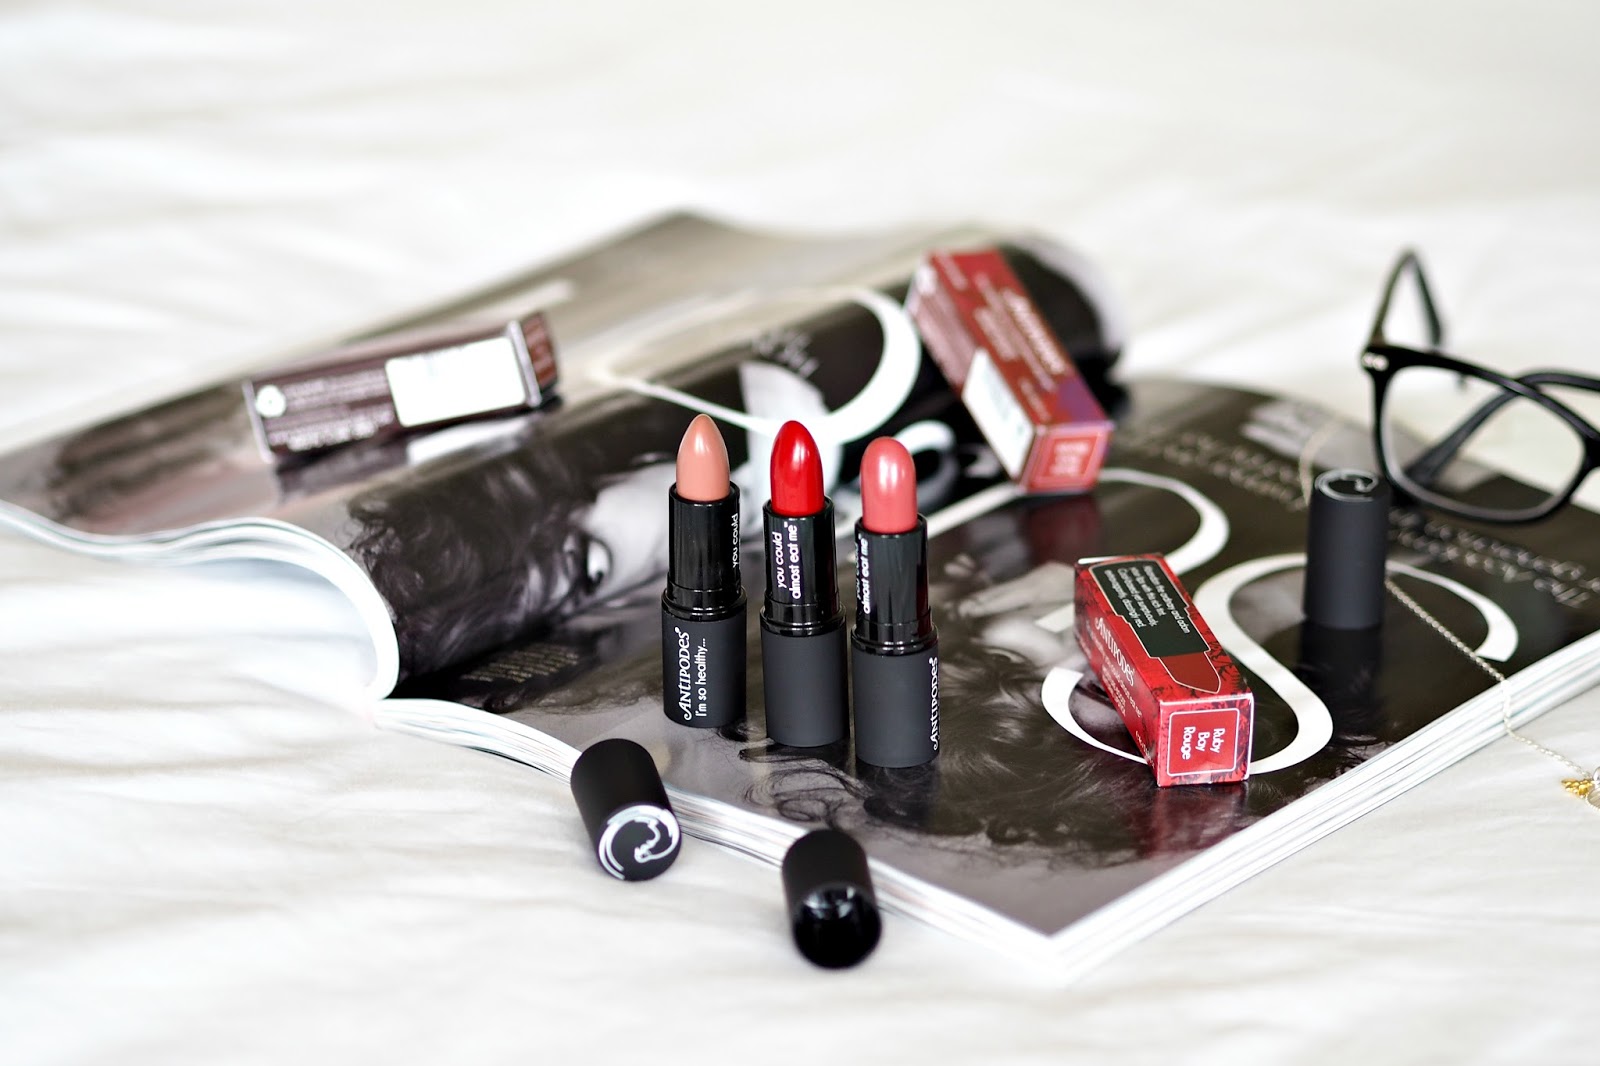 Antipodes lipsticks review in shades Queentown Hot Chocolate, Boom Rock Bronze and Ruby Bay Rouge.